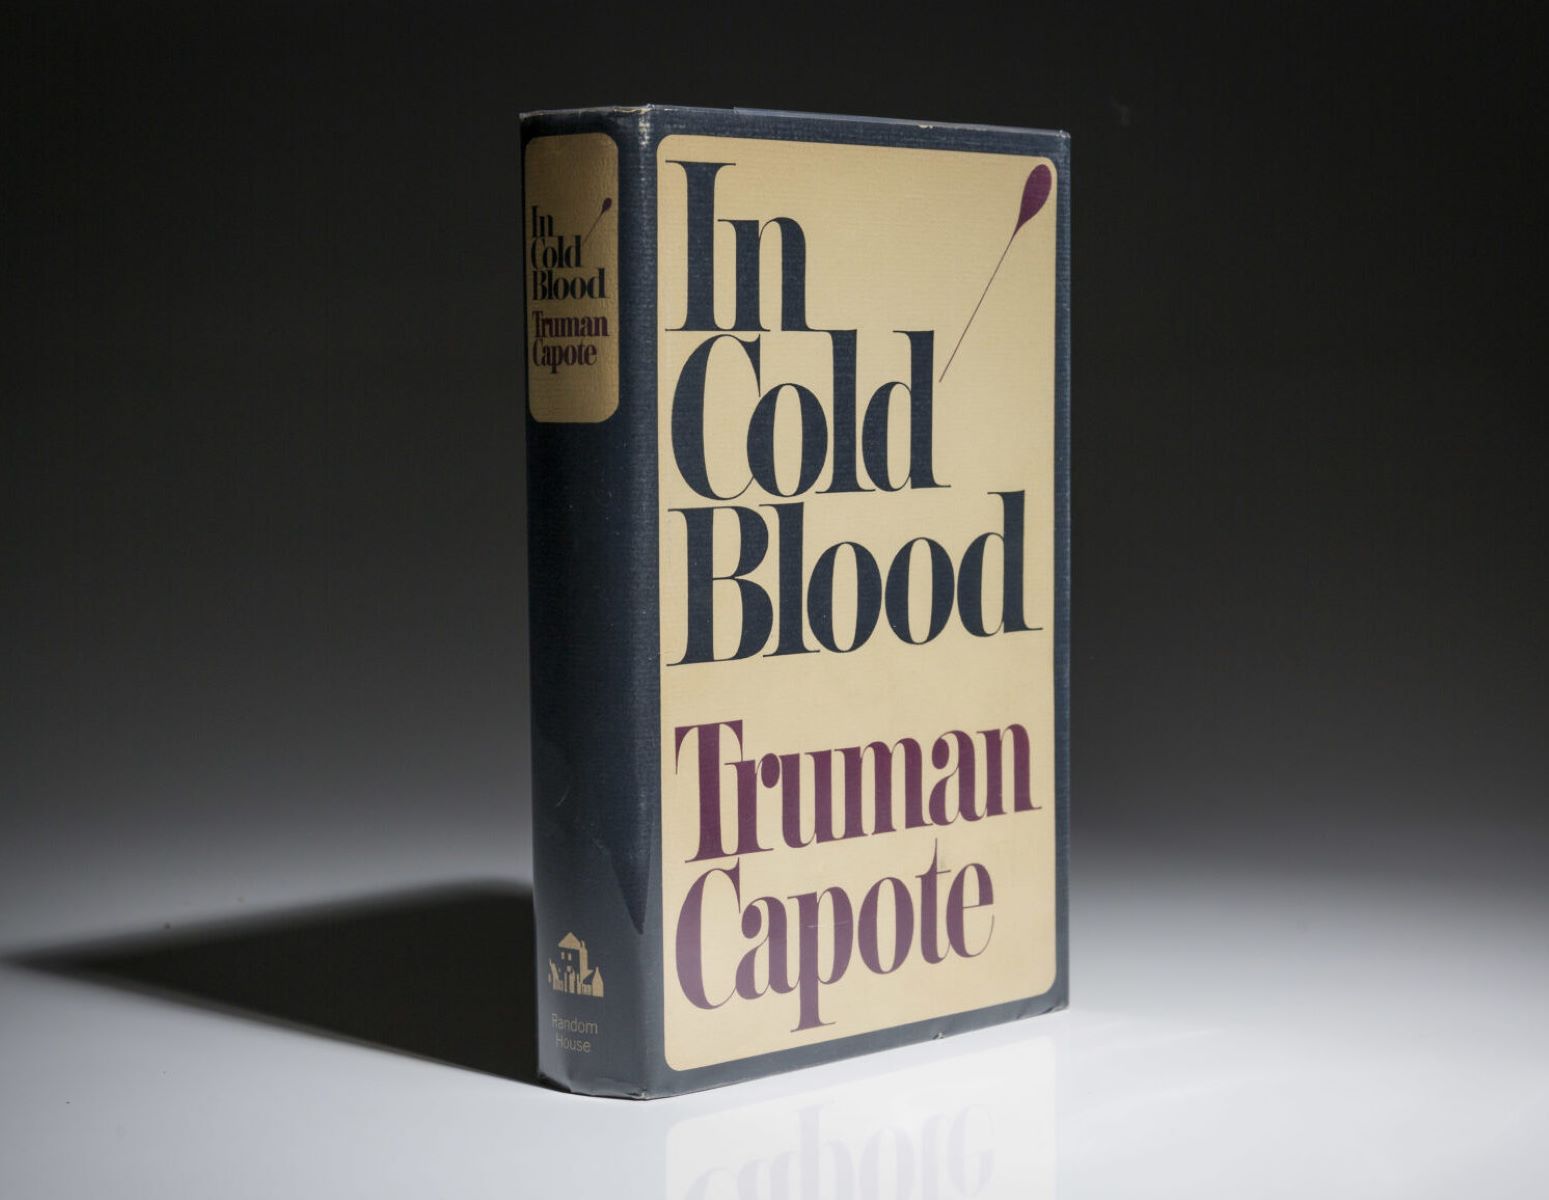 18 Extraordinary Facts About In Cold Blood - Truman Capote - Facts.net